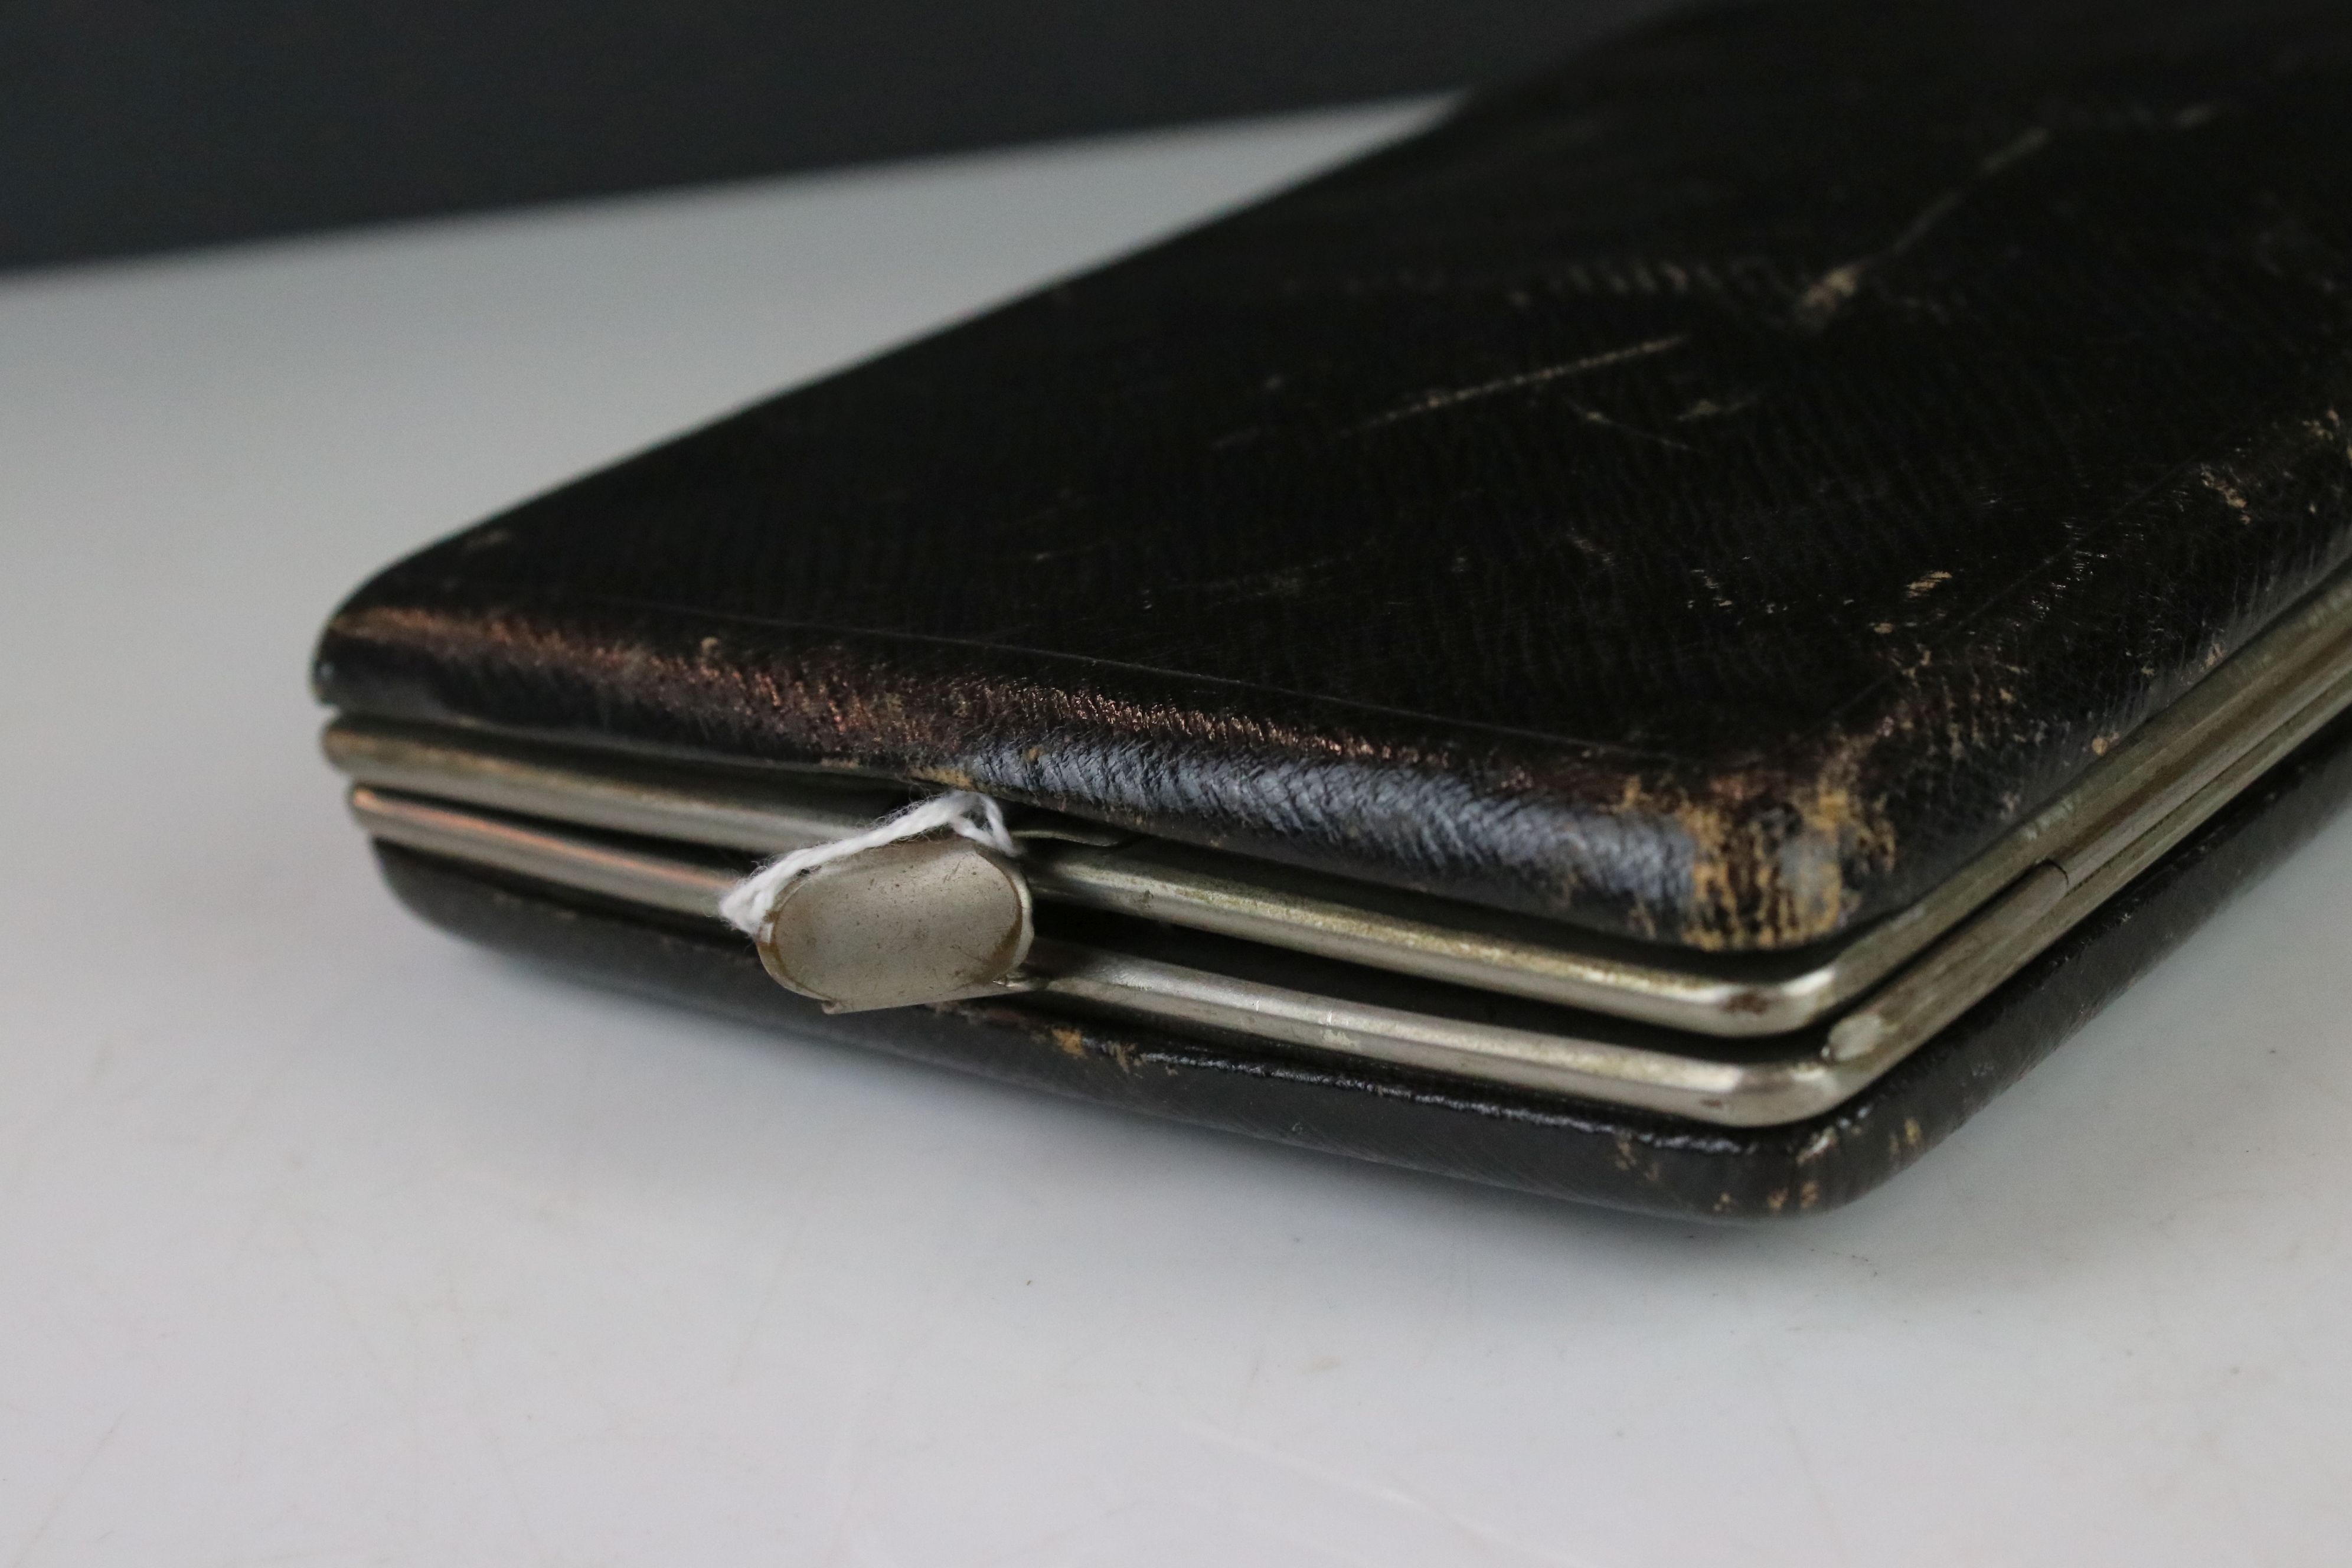 Early 20th century Ernest Hofman Leather Stationery Wallet - Image 3 of 5